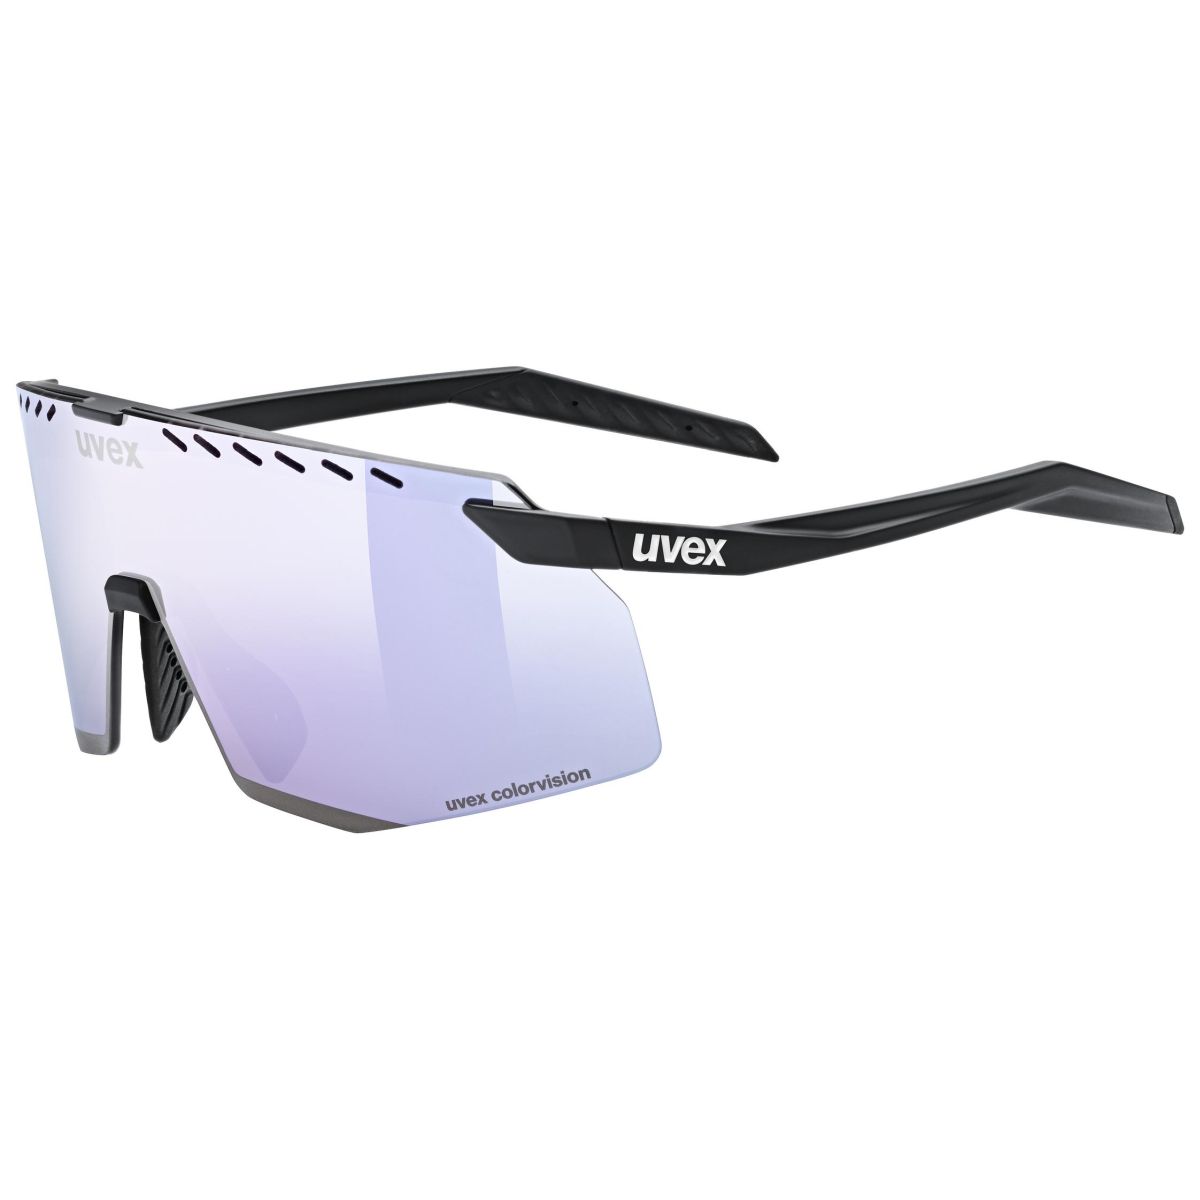 Picture of Uvex pace stage CV Glasses - black matt/mirror pink colorvision